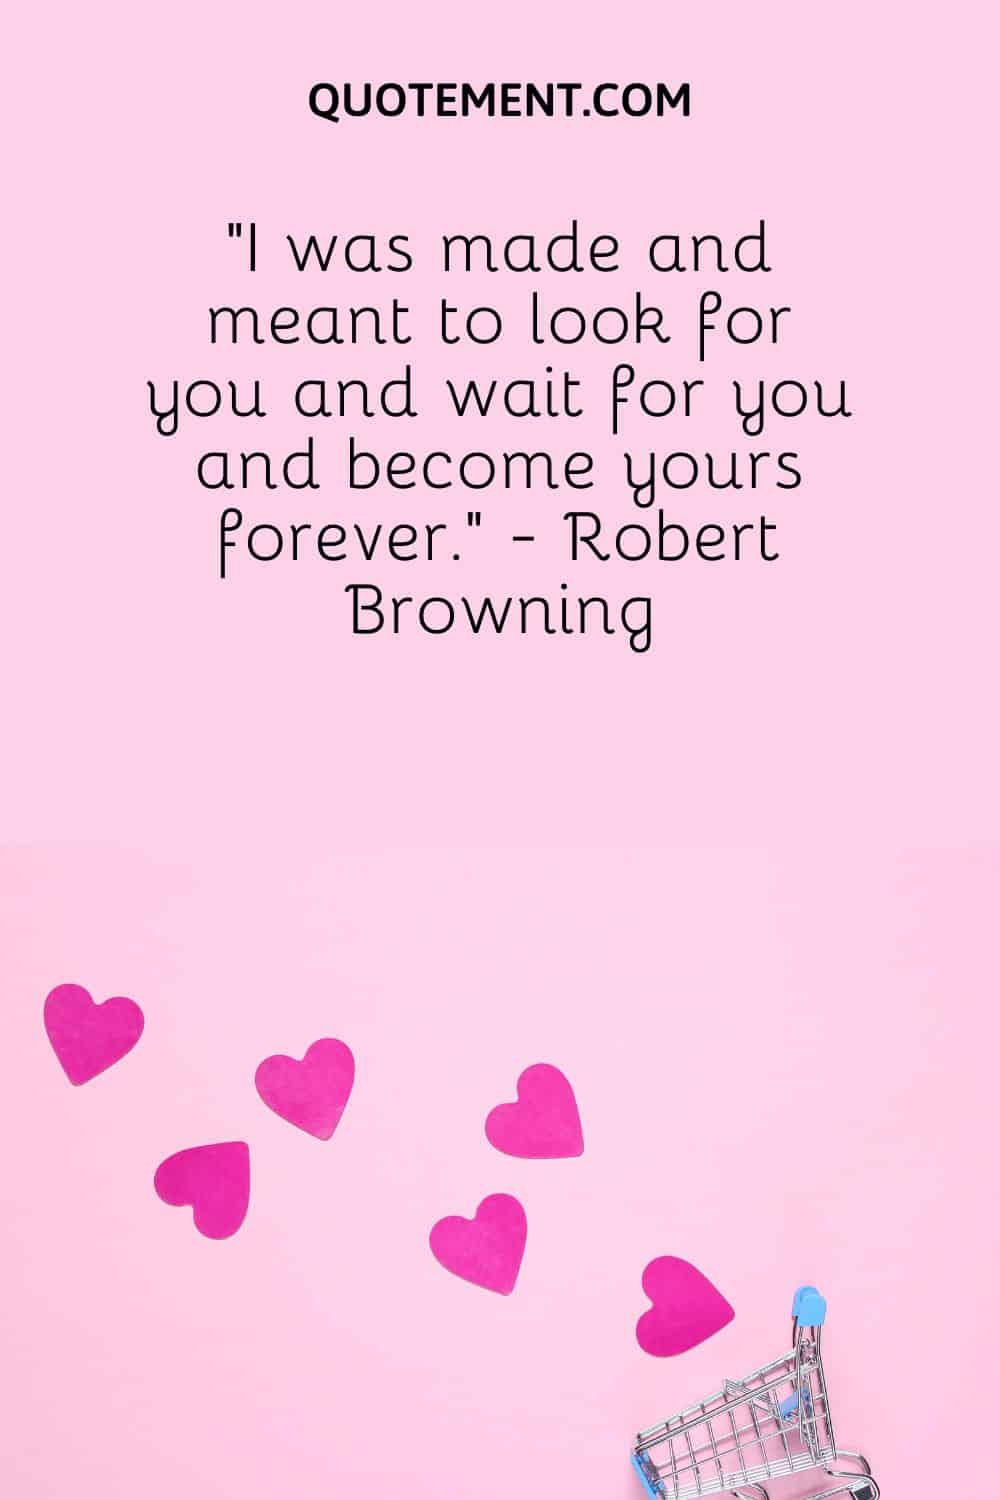 “I was made and meant to look for you and wait for you and become yours forever.” - Robert Browning